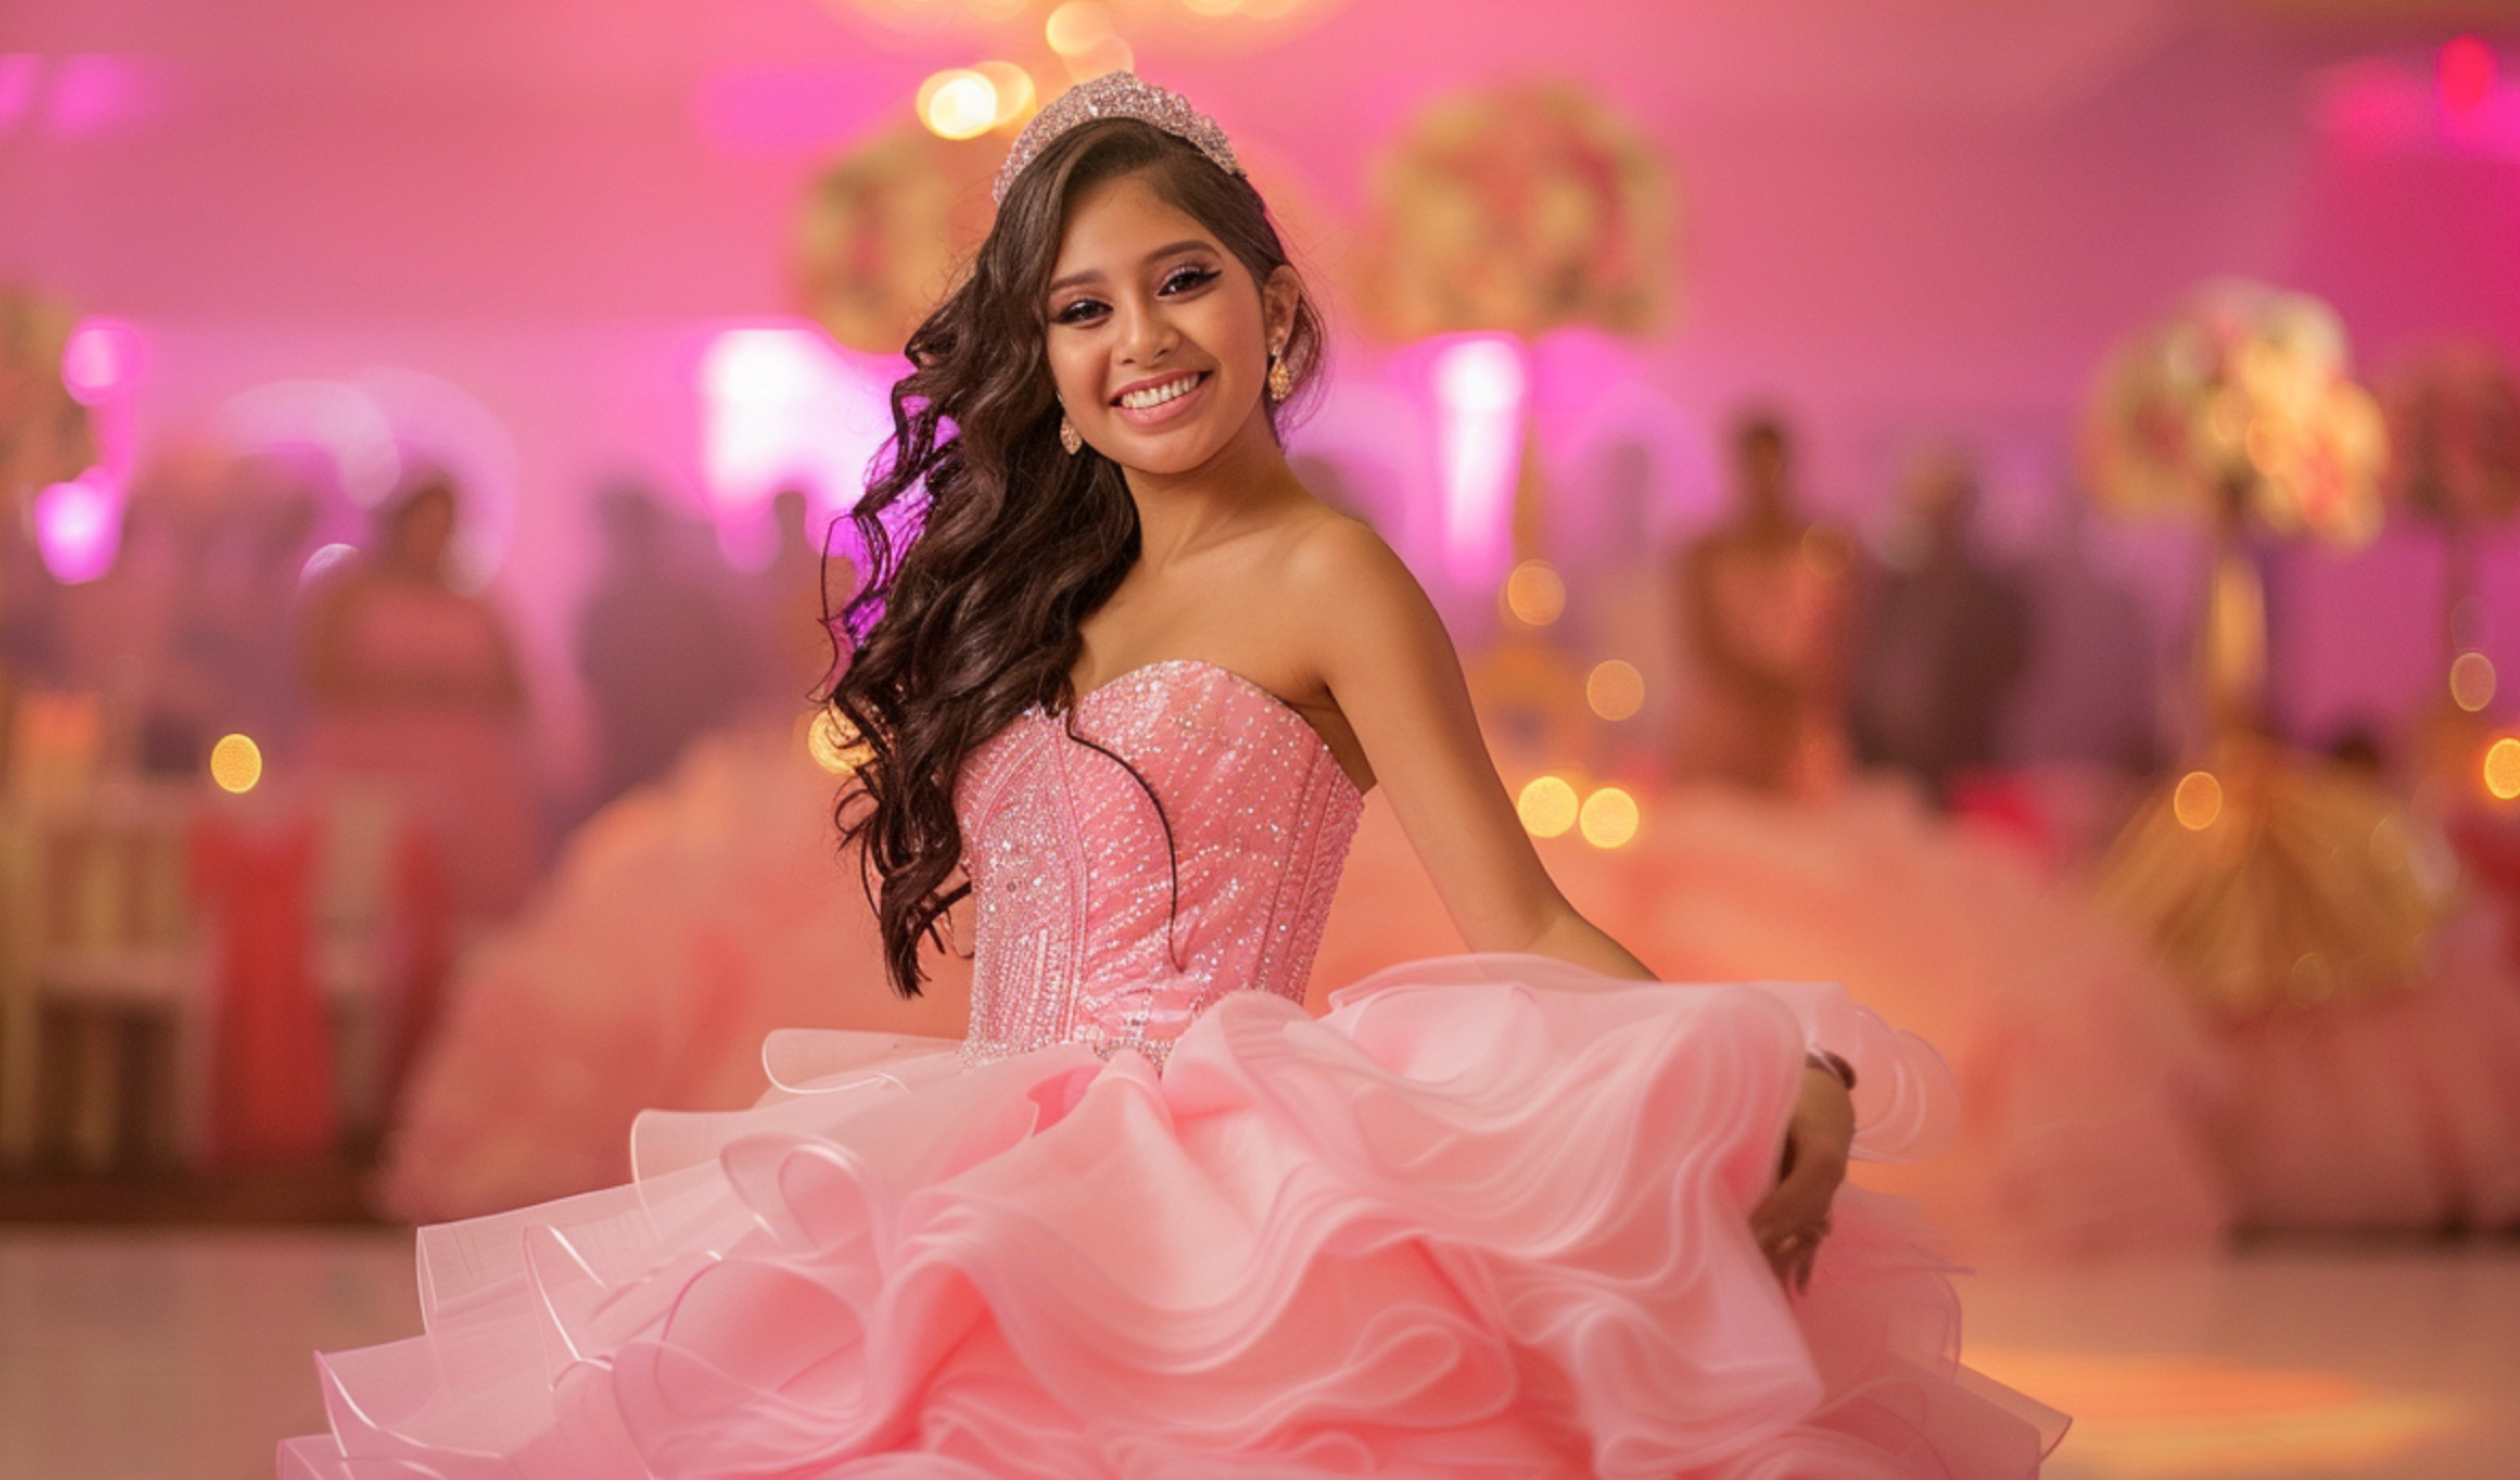 5 Essential Tips for Planning Your Quinceanera in Las Vegas